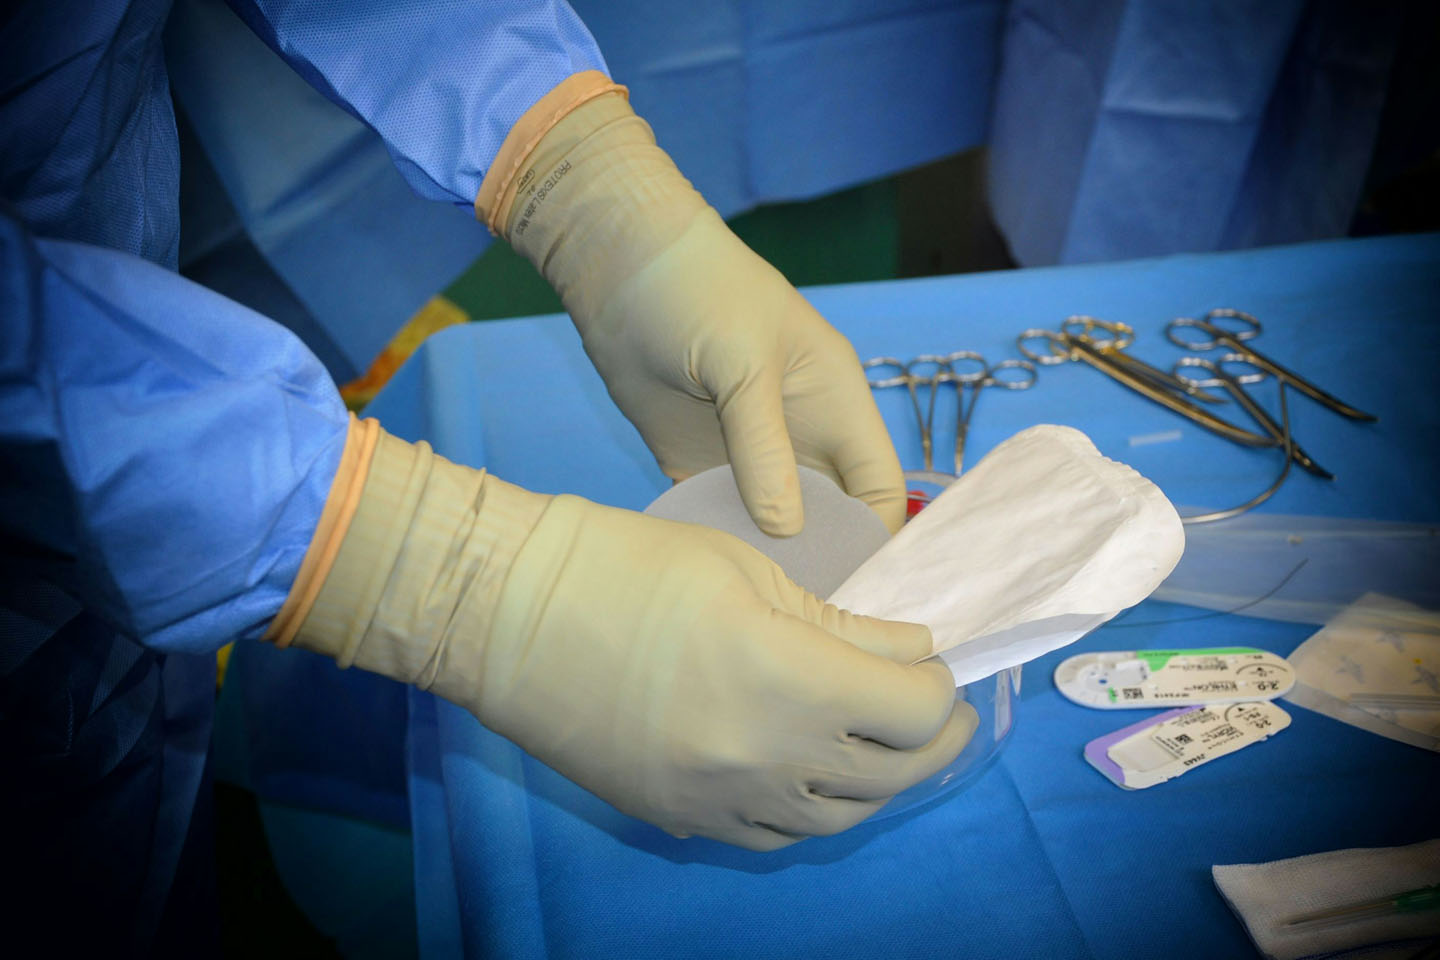 A surgical assistant wearing surgical gloves and organizing sterile tools and equipment in the operating table.